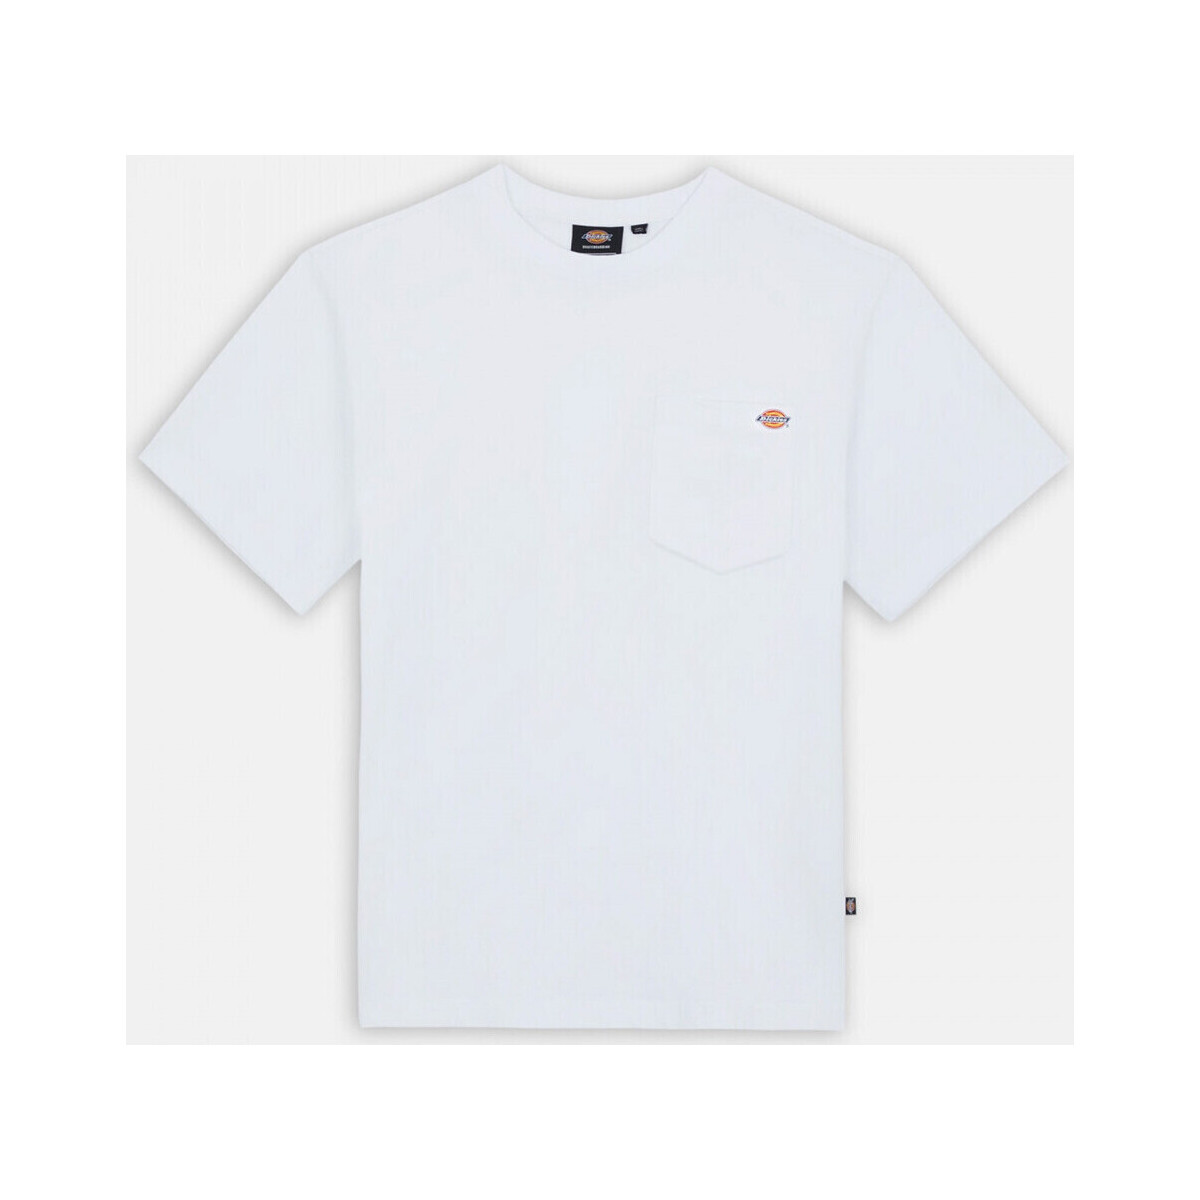 Textiel Heren T-shirts & Polo’s Dickies Luray pocket tee ss Wit